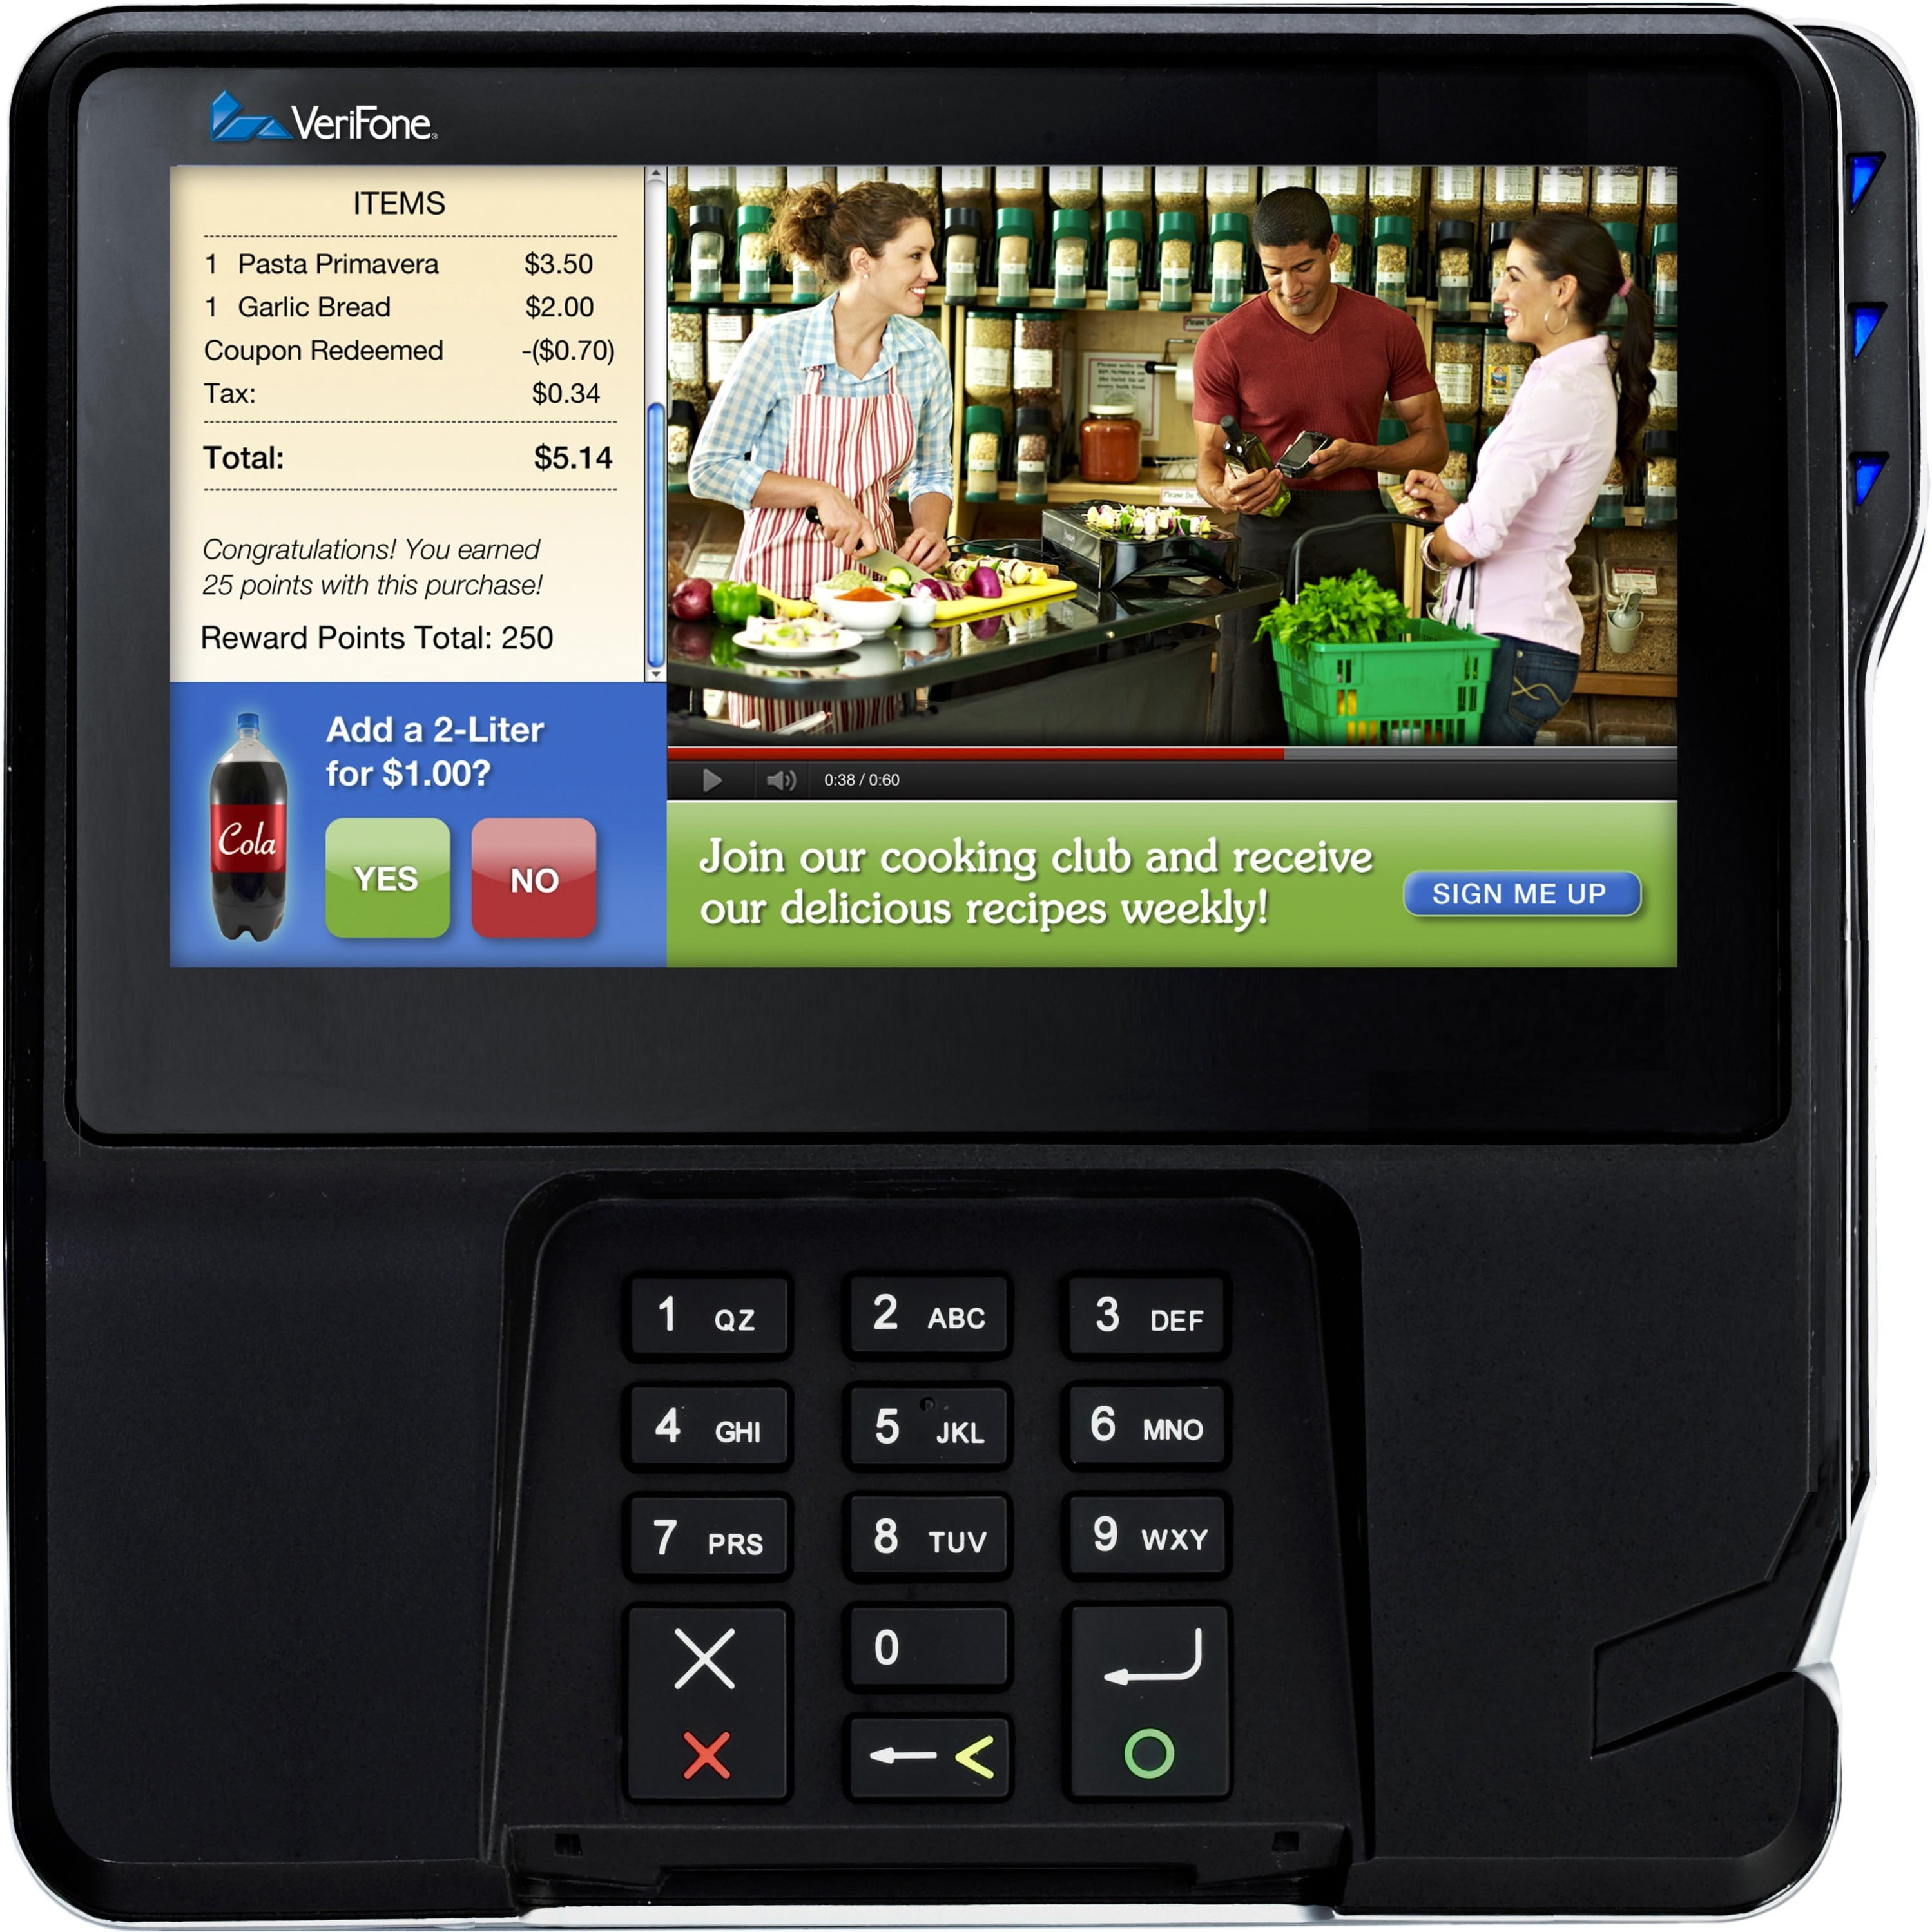 Verifone MX925 Pin-pad Credit Card Payment Terminal 49689749 for sale online 